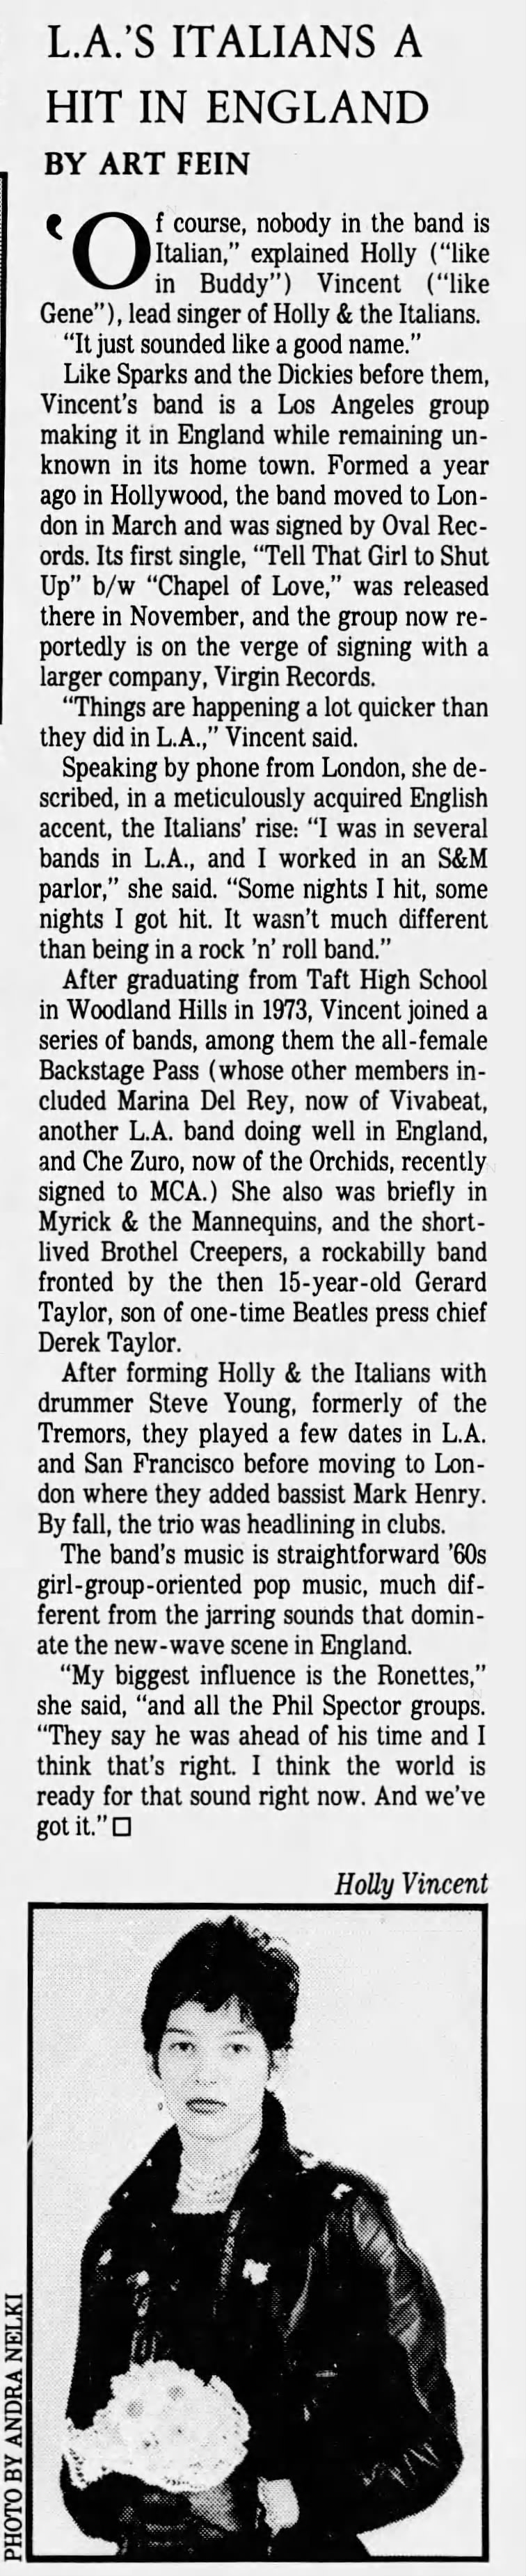 Holly and the Italians a Hit in England (Holly Beth Vincent)